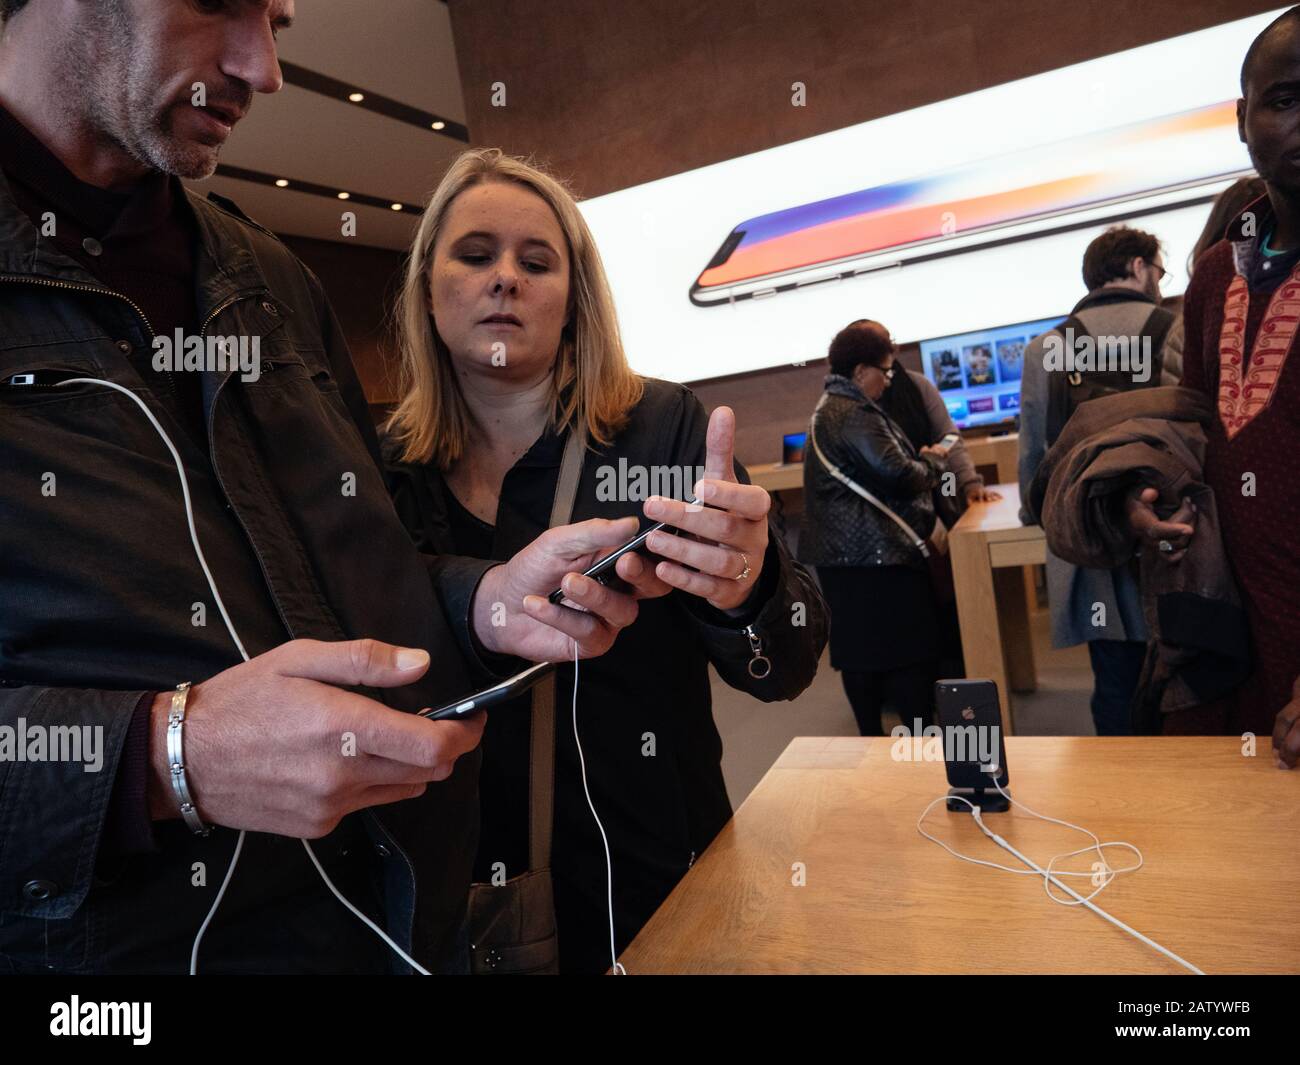 Paris, France - Nov 3, 2017: Side view of young couple admiring inside Apple Store the latest professional iPhone smartphone manufactured by Apple Computers comparing with older model Android phone Stock Photo